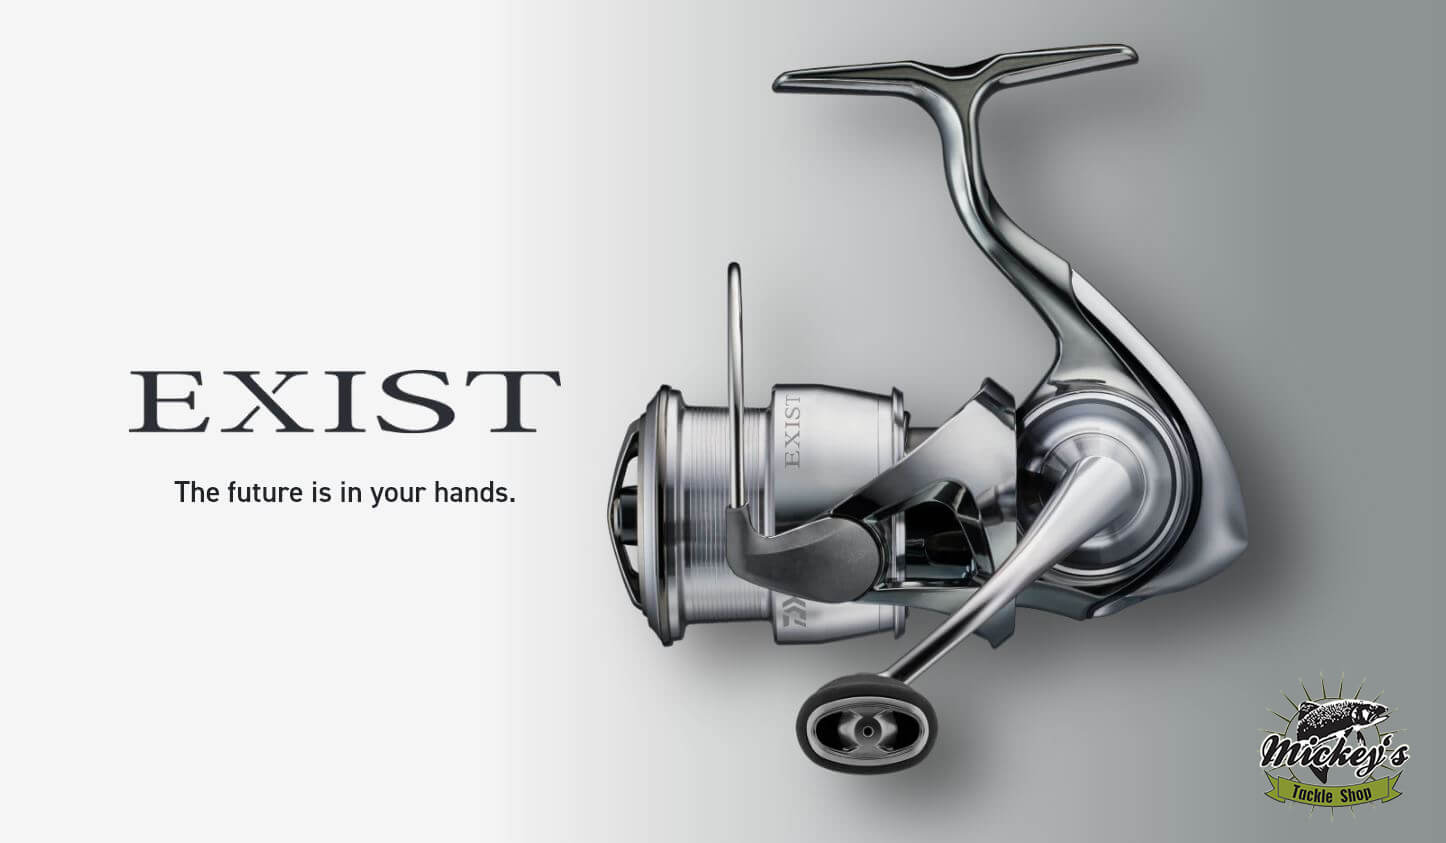 Daiwa Exist, NEW Daiwa 22 Exist - The future is in your hands